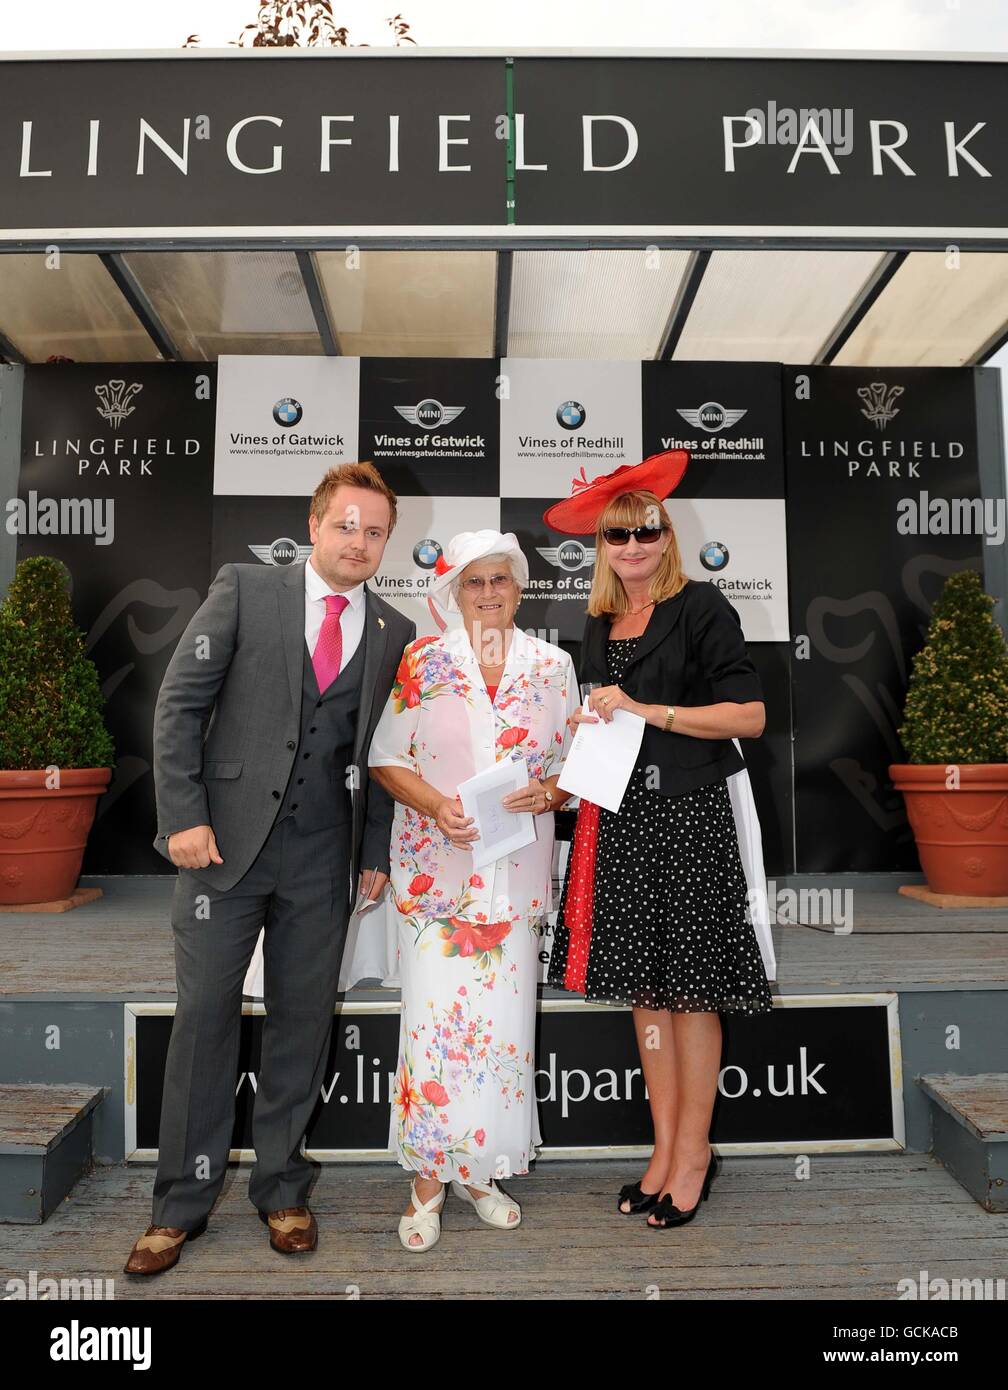 Horse Racing - Vines of Gatwick and Redhill Ladies' Evening - featuring Girls B Loud - Lingfield Park. Winners (left to right) of the best dress male, female and best accessory at Lingfield Races. Stock Photo